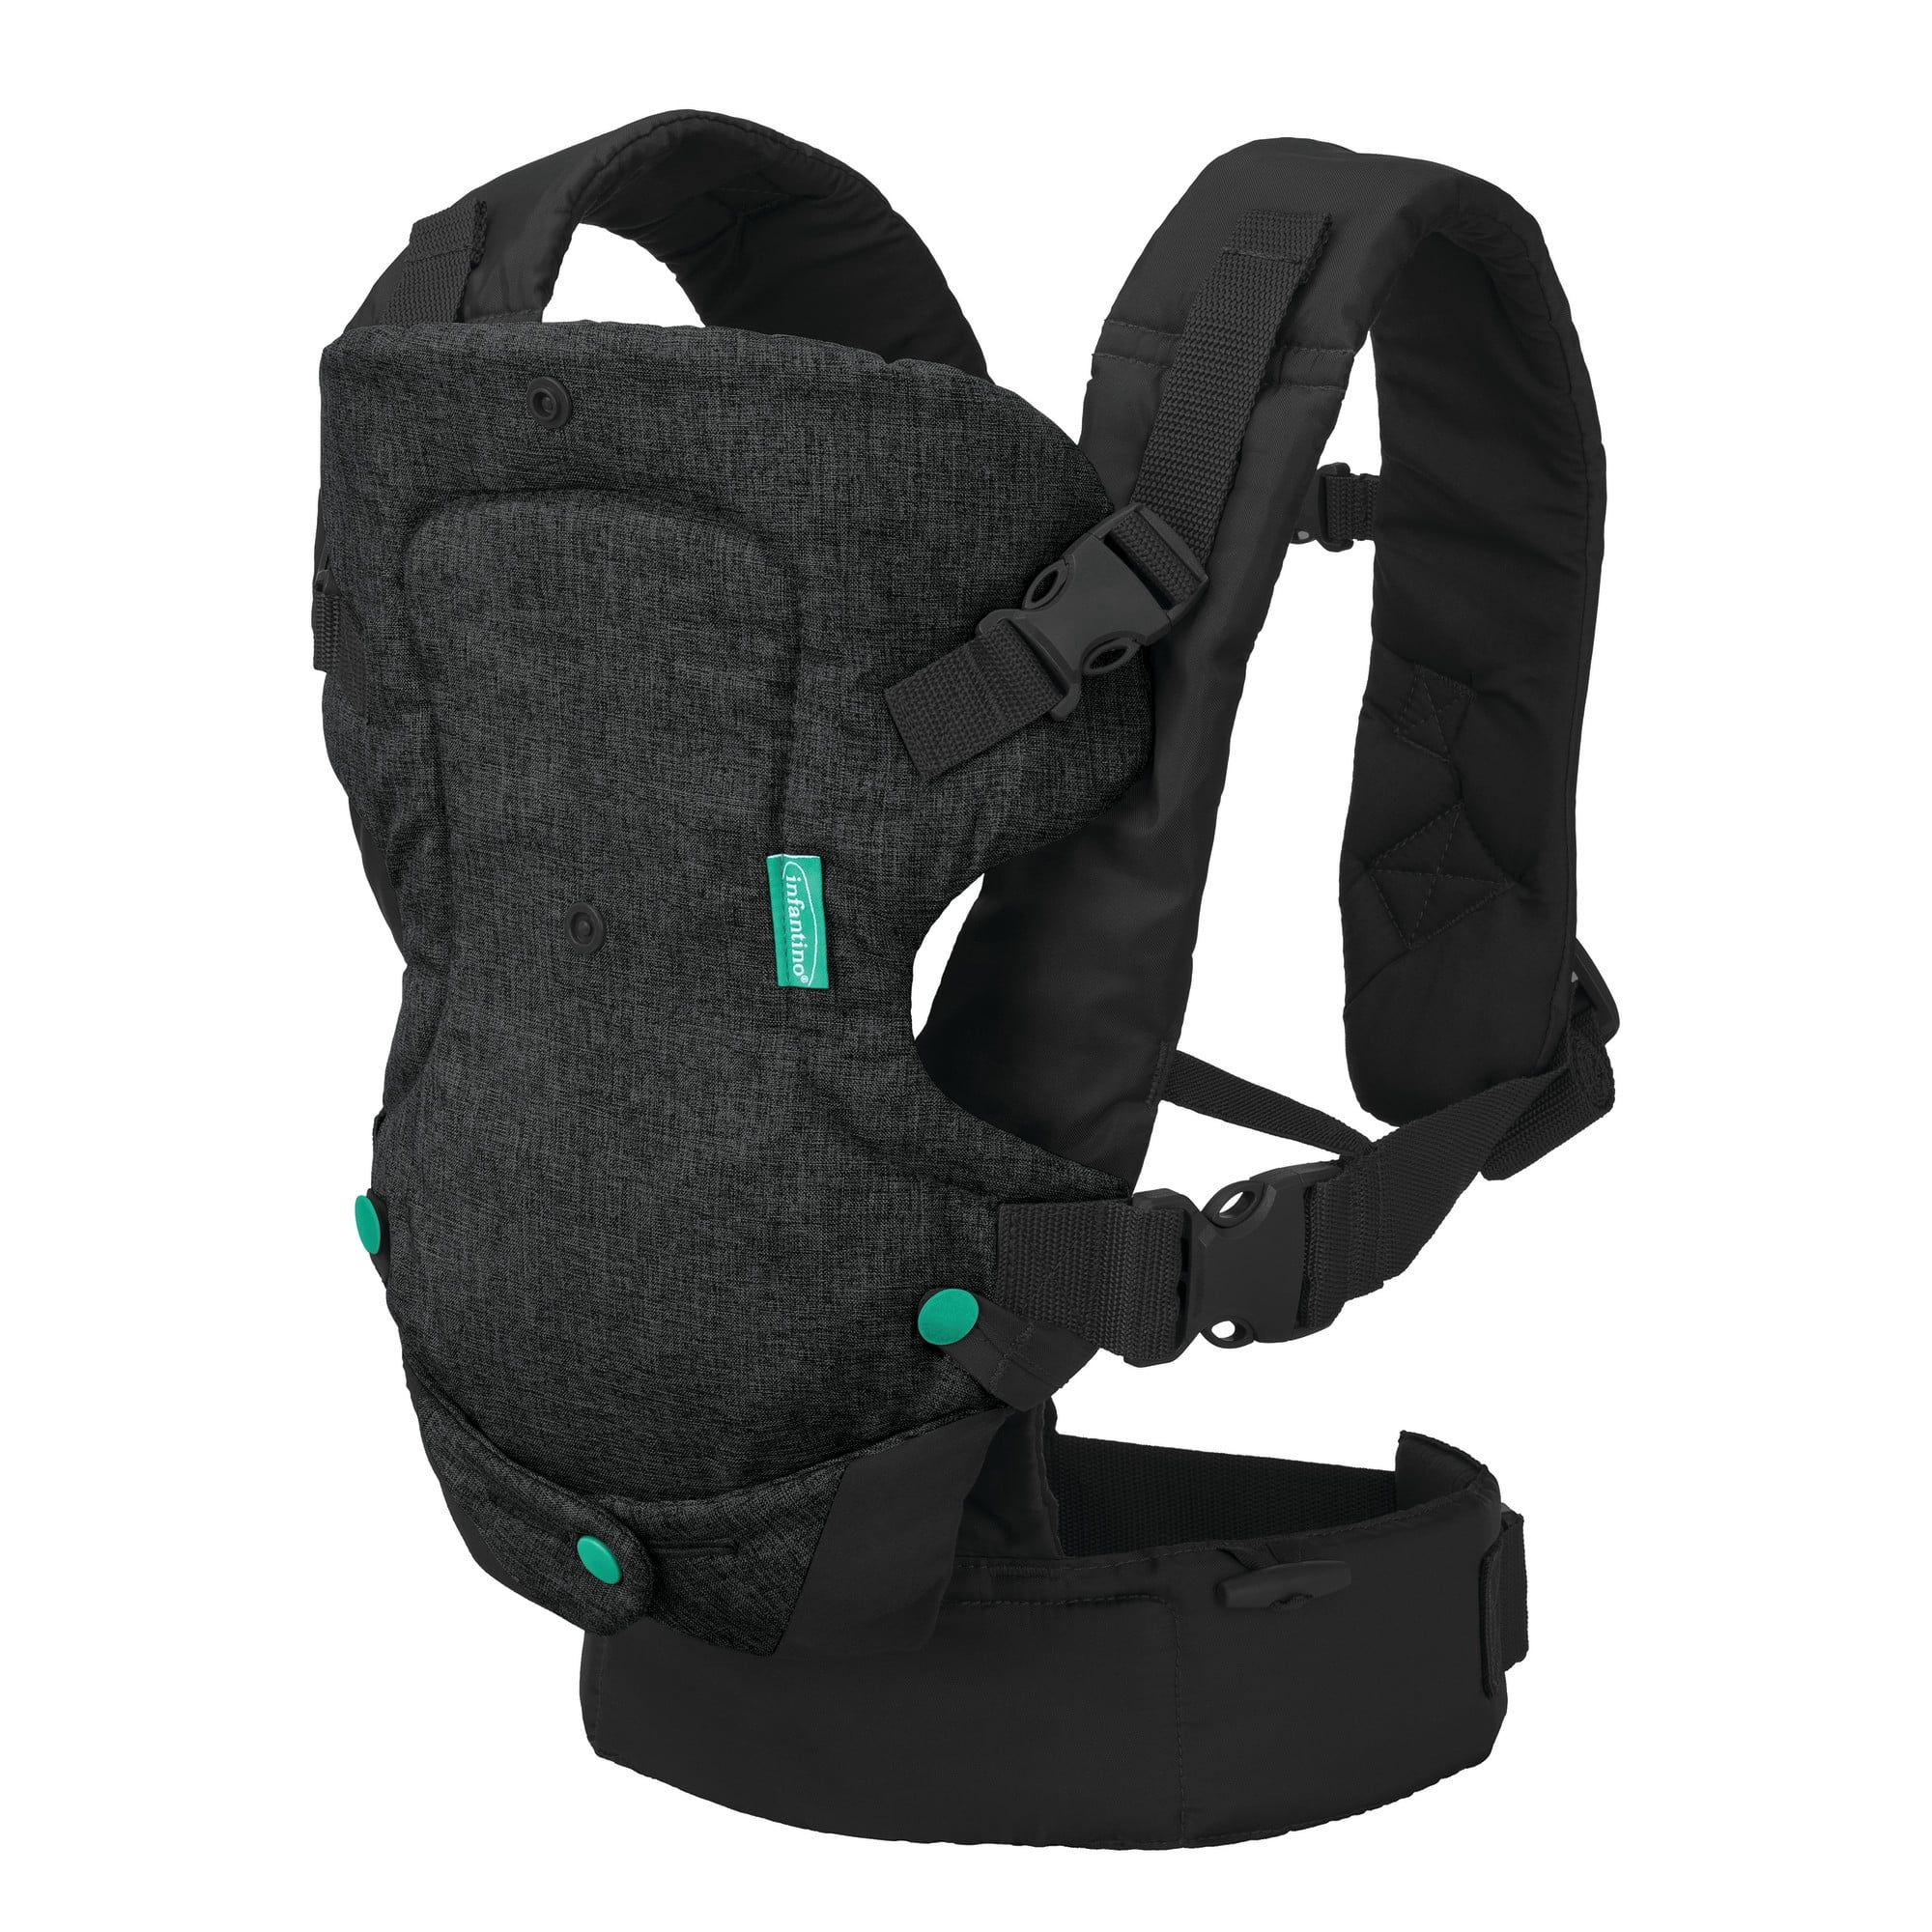 Infantino Flip 4-In-1 Convertible Baby Carrier, 4-Position, 8-32lb, Black | Walmart (US)